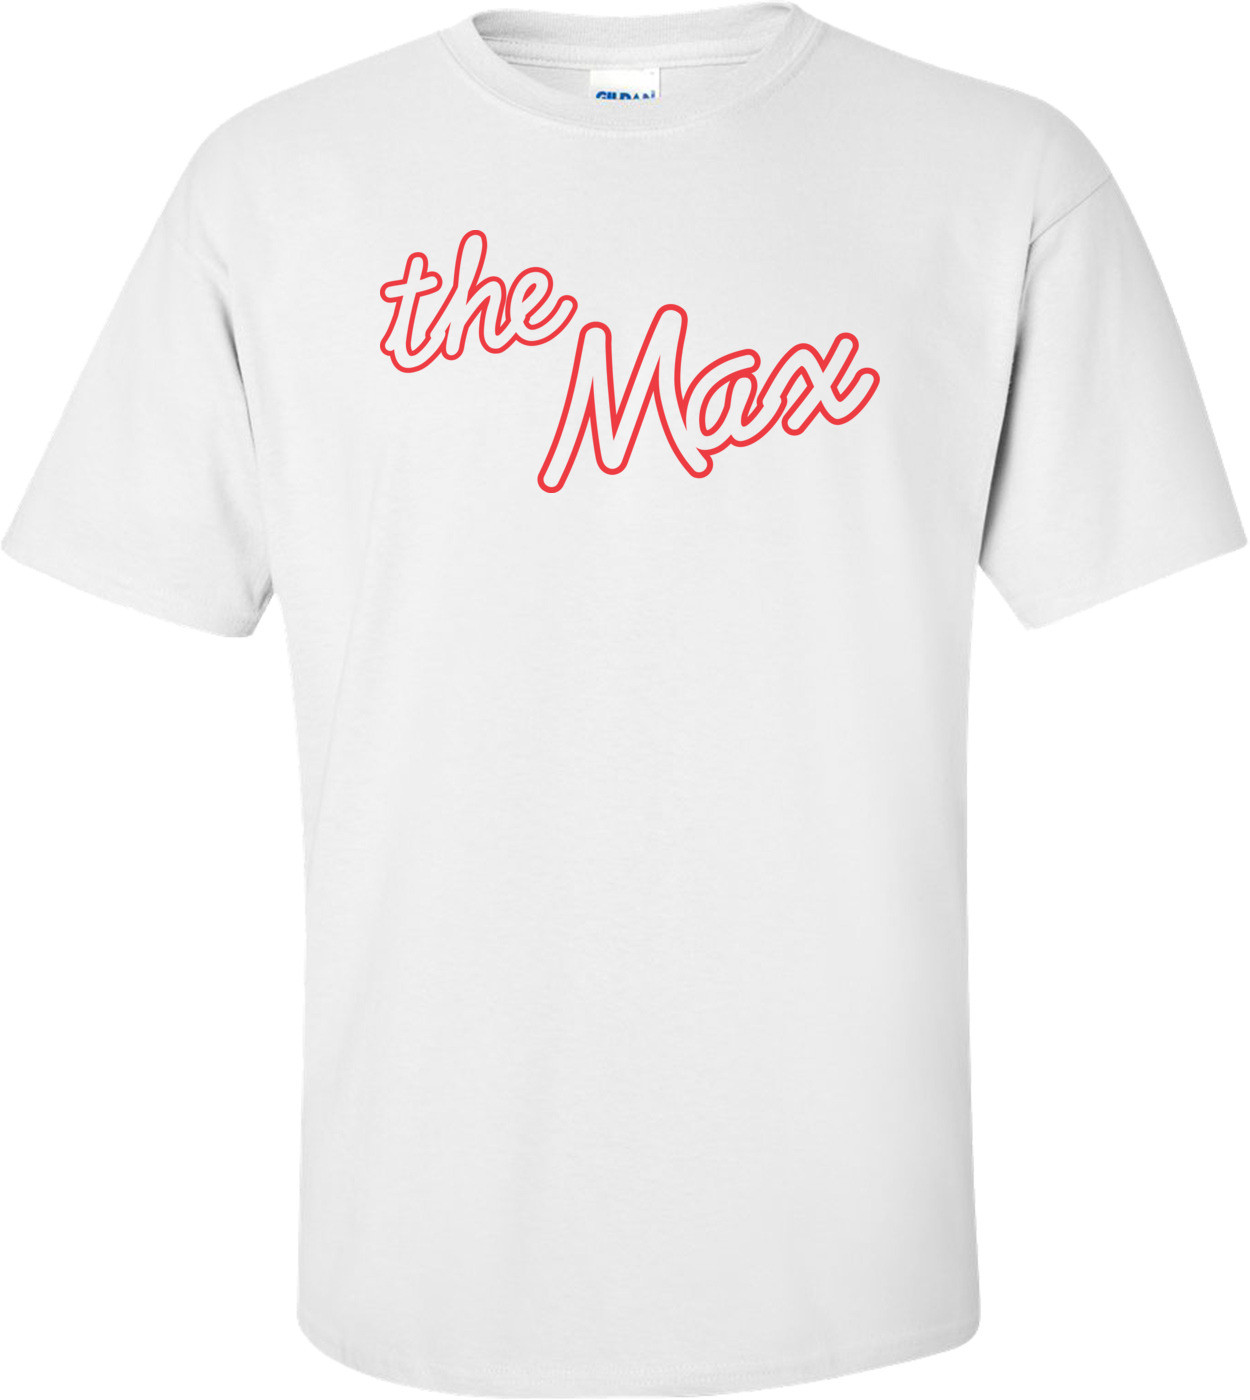 The Max - Saved By The Bell T-shirt